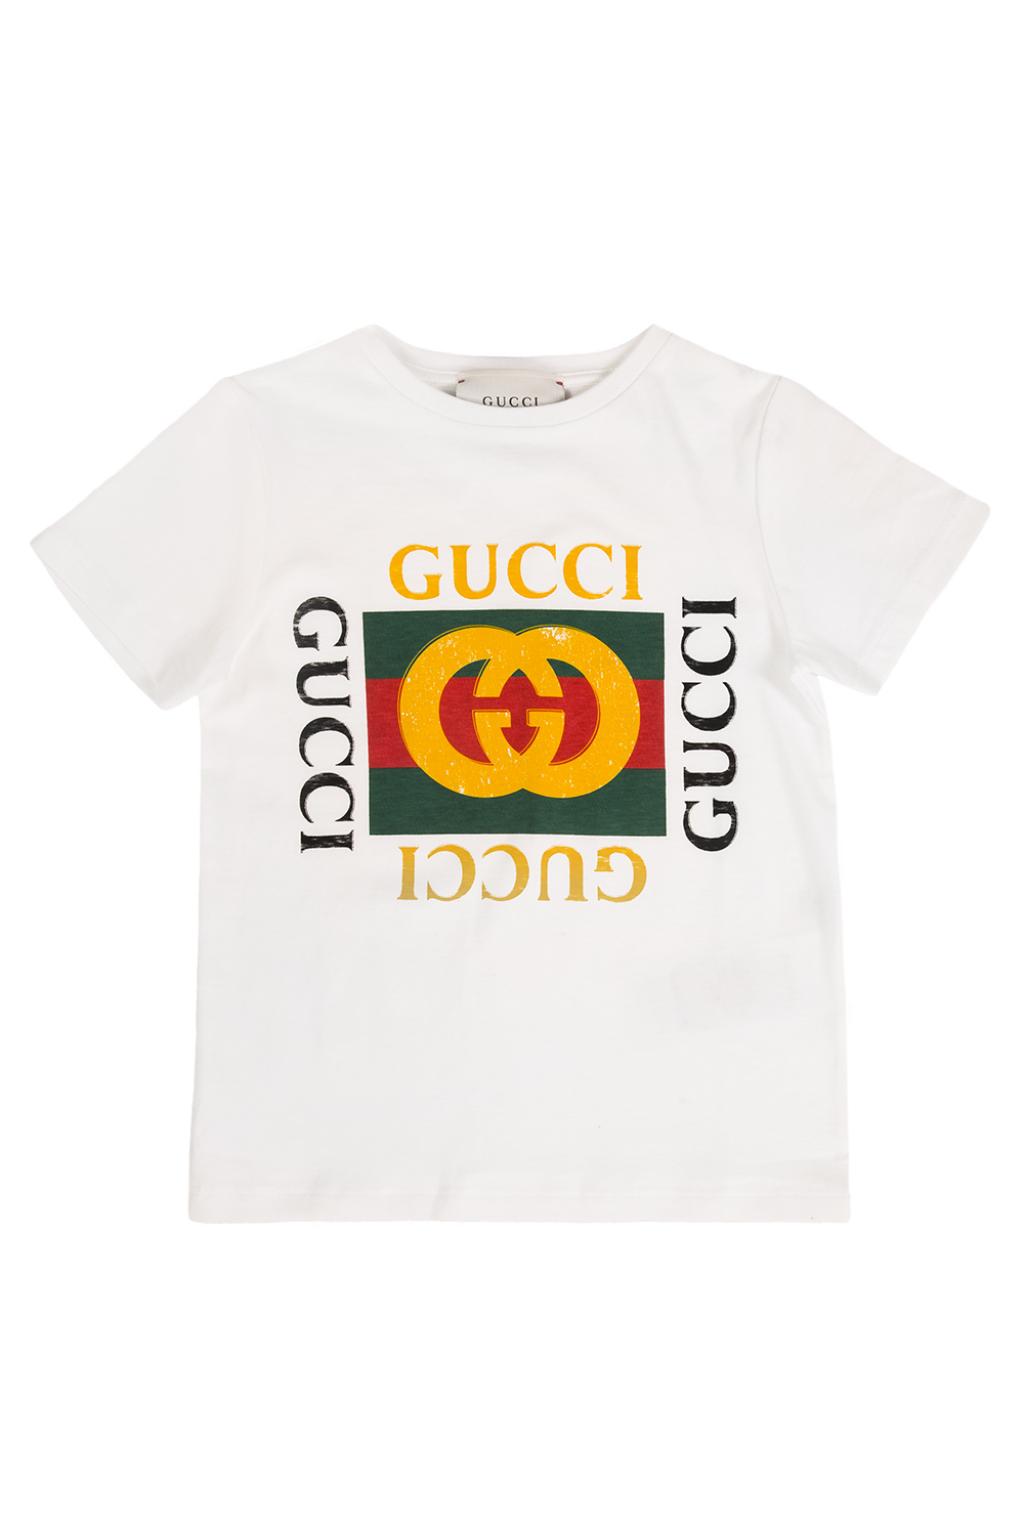 white green and red gucci shirt